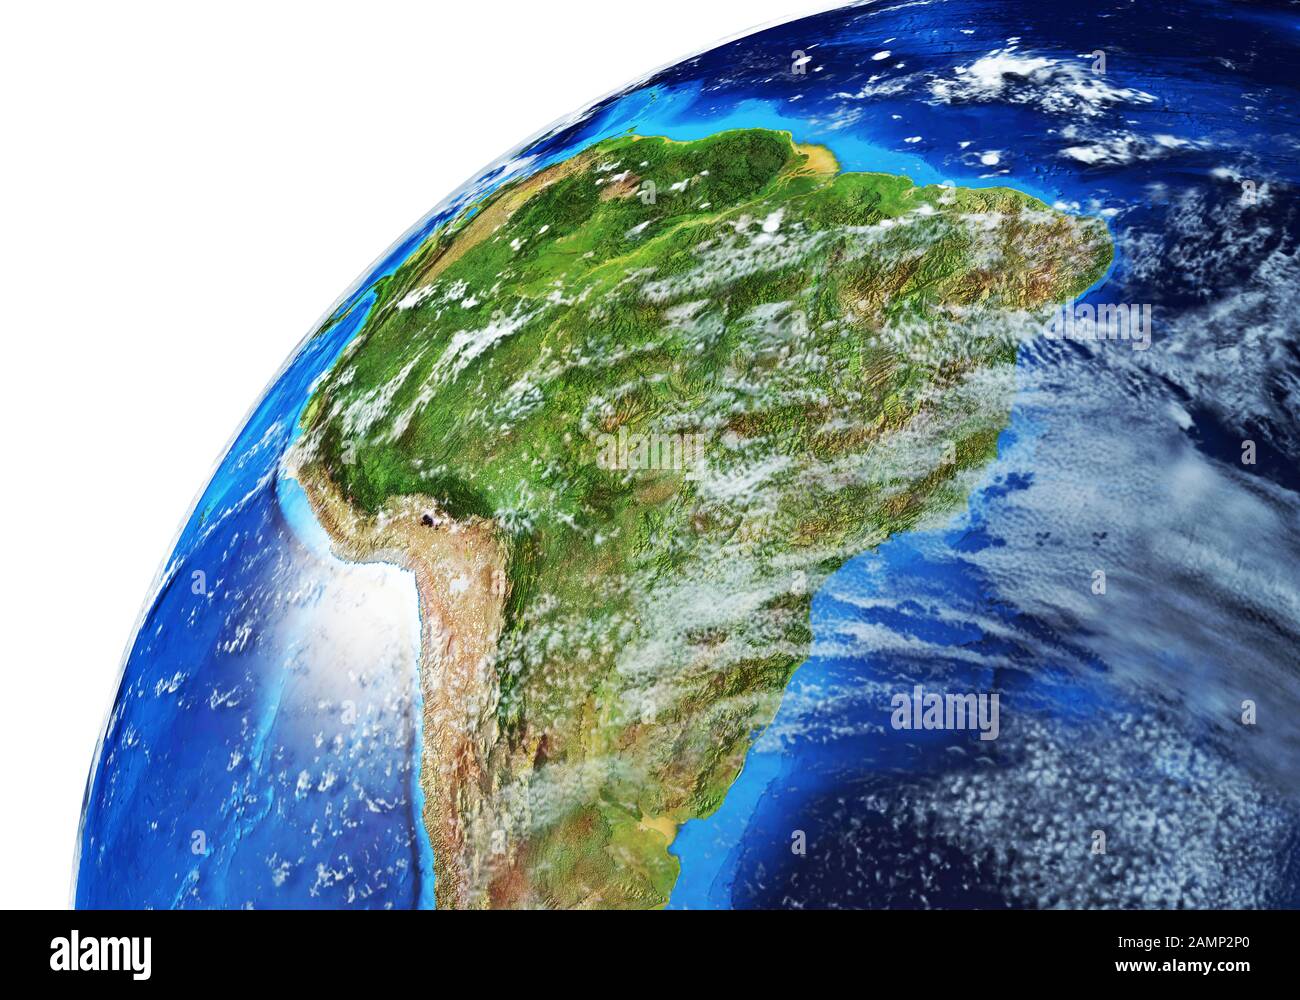 Earth globe close- up of the South America. Very detailed and Photo realistic. With clouds. (Original maps provided by NASA.) Stock Photo